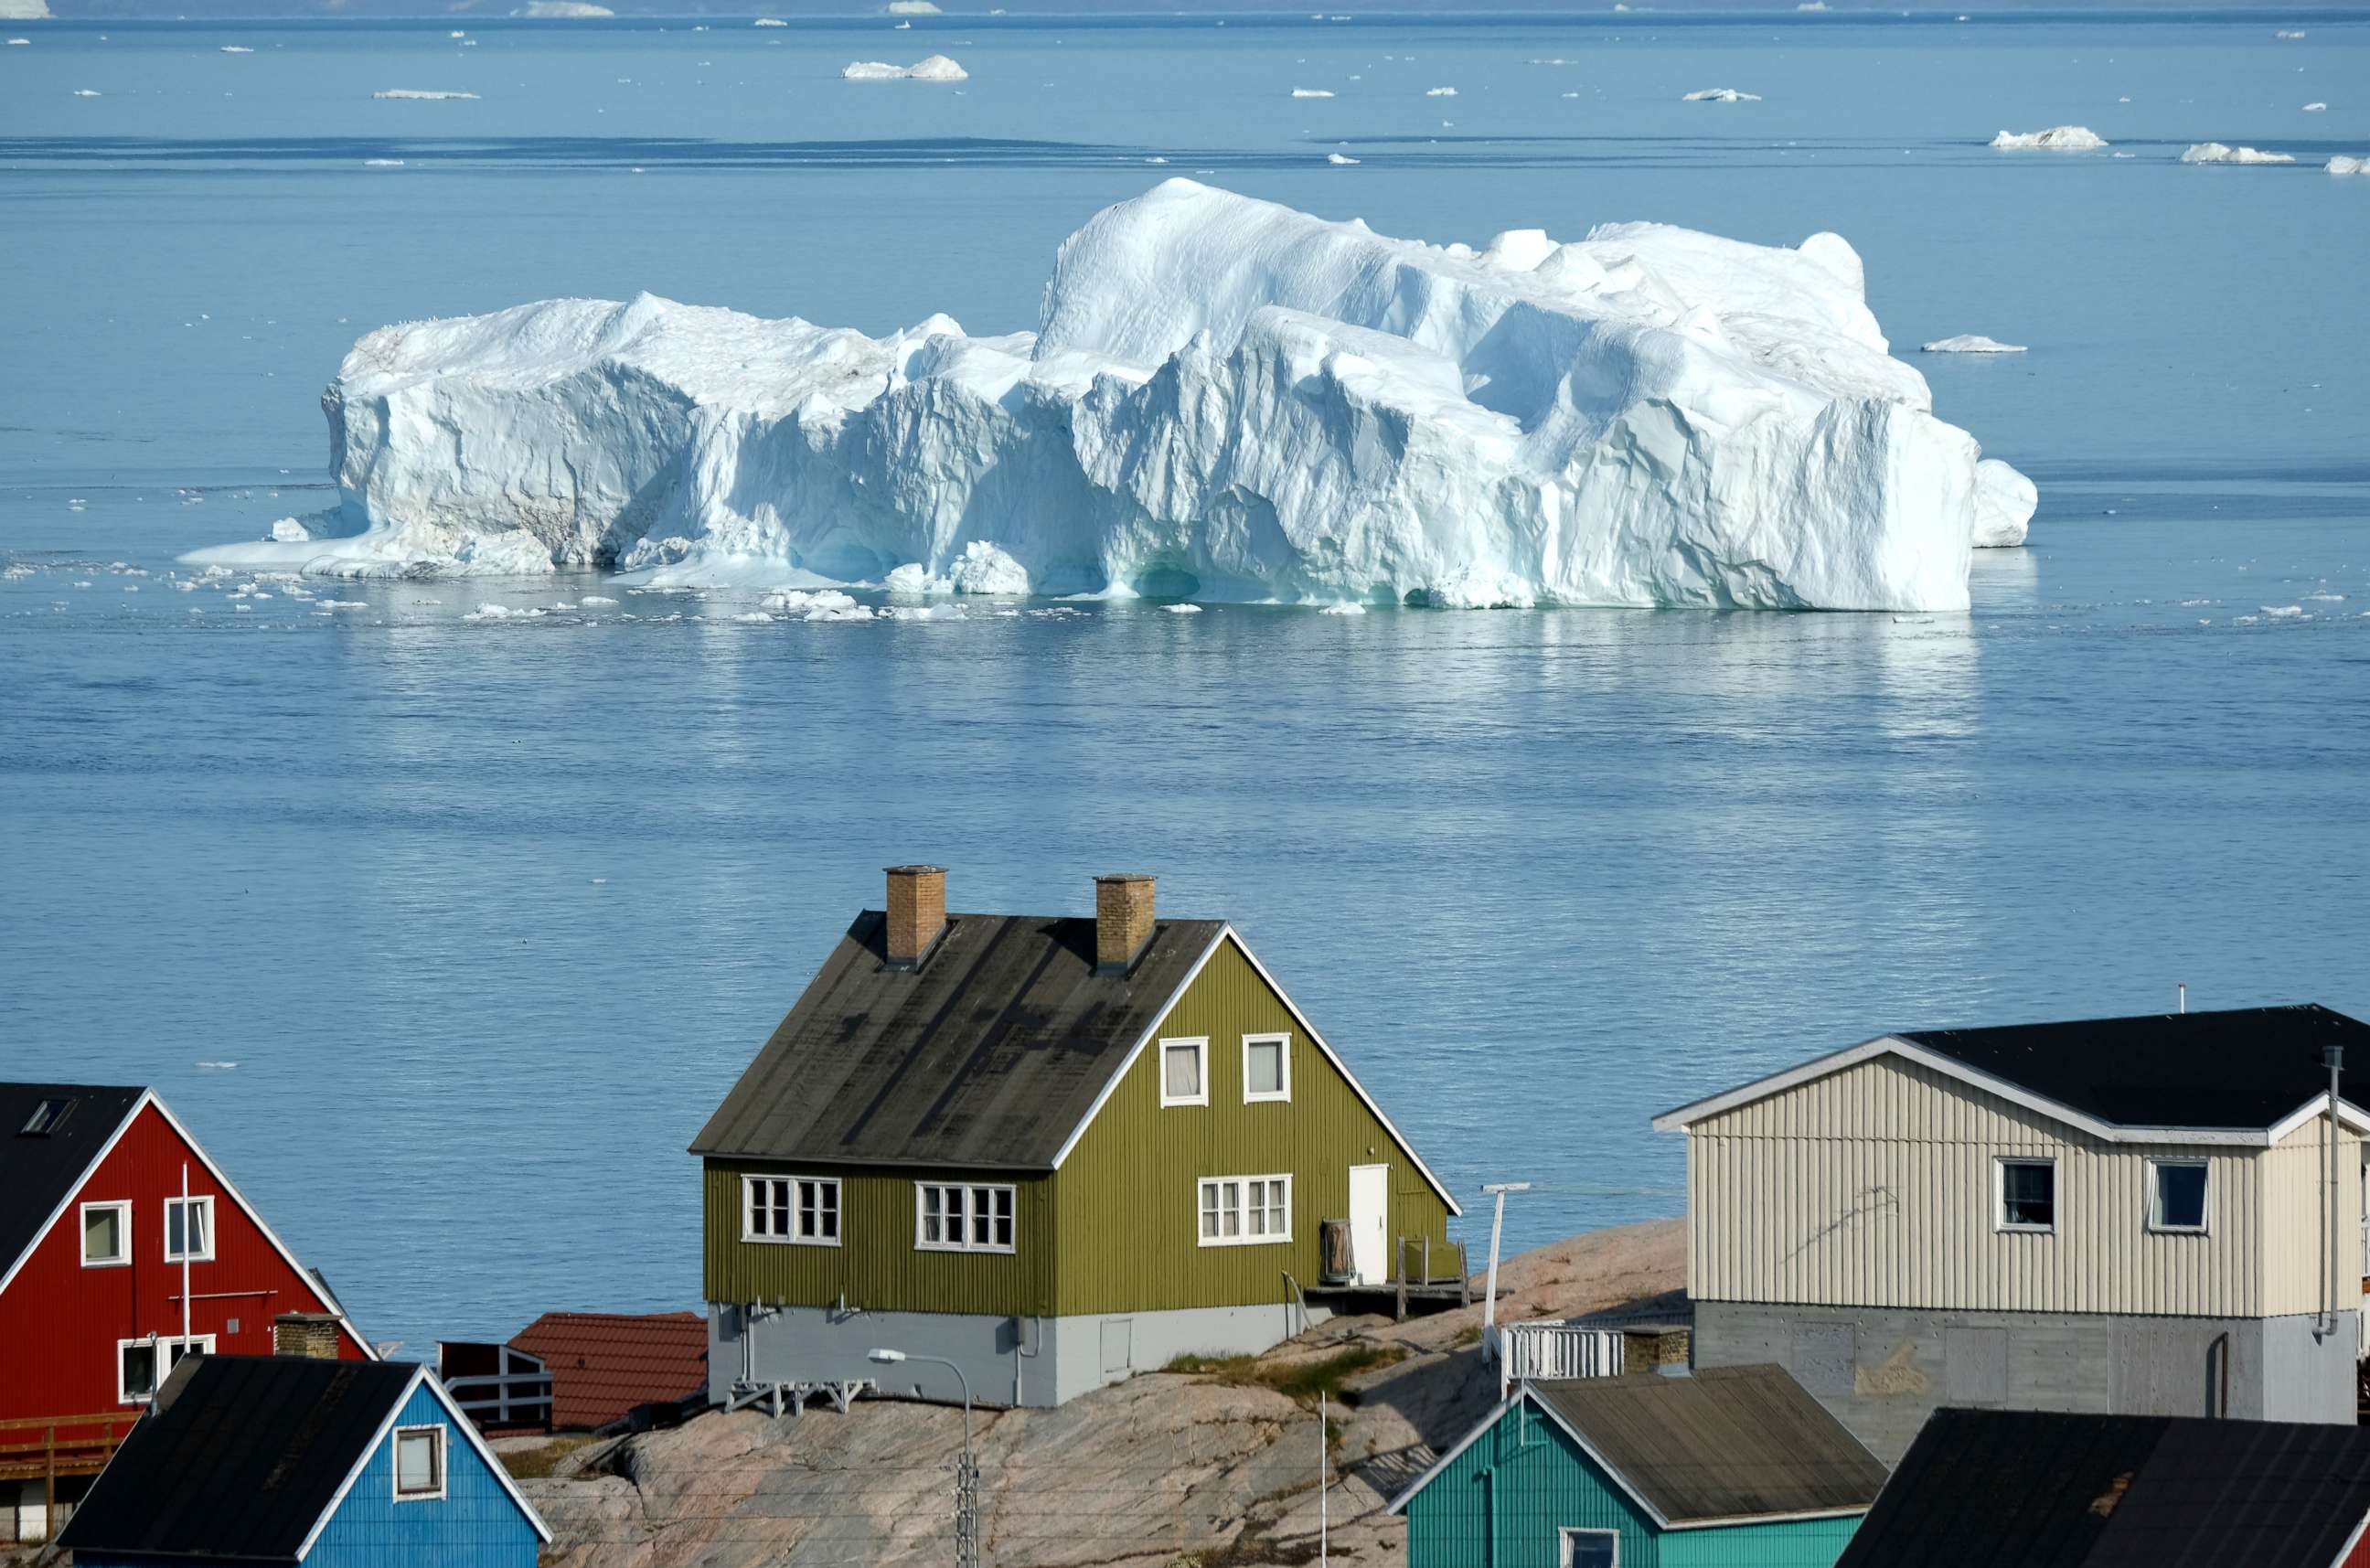 PHOTO: An iceberg floats in Disko Bay behind houses during unseasonably warm weather, July 30, 2019, in Ilulissat, Greenland.